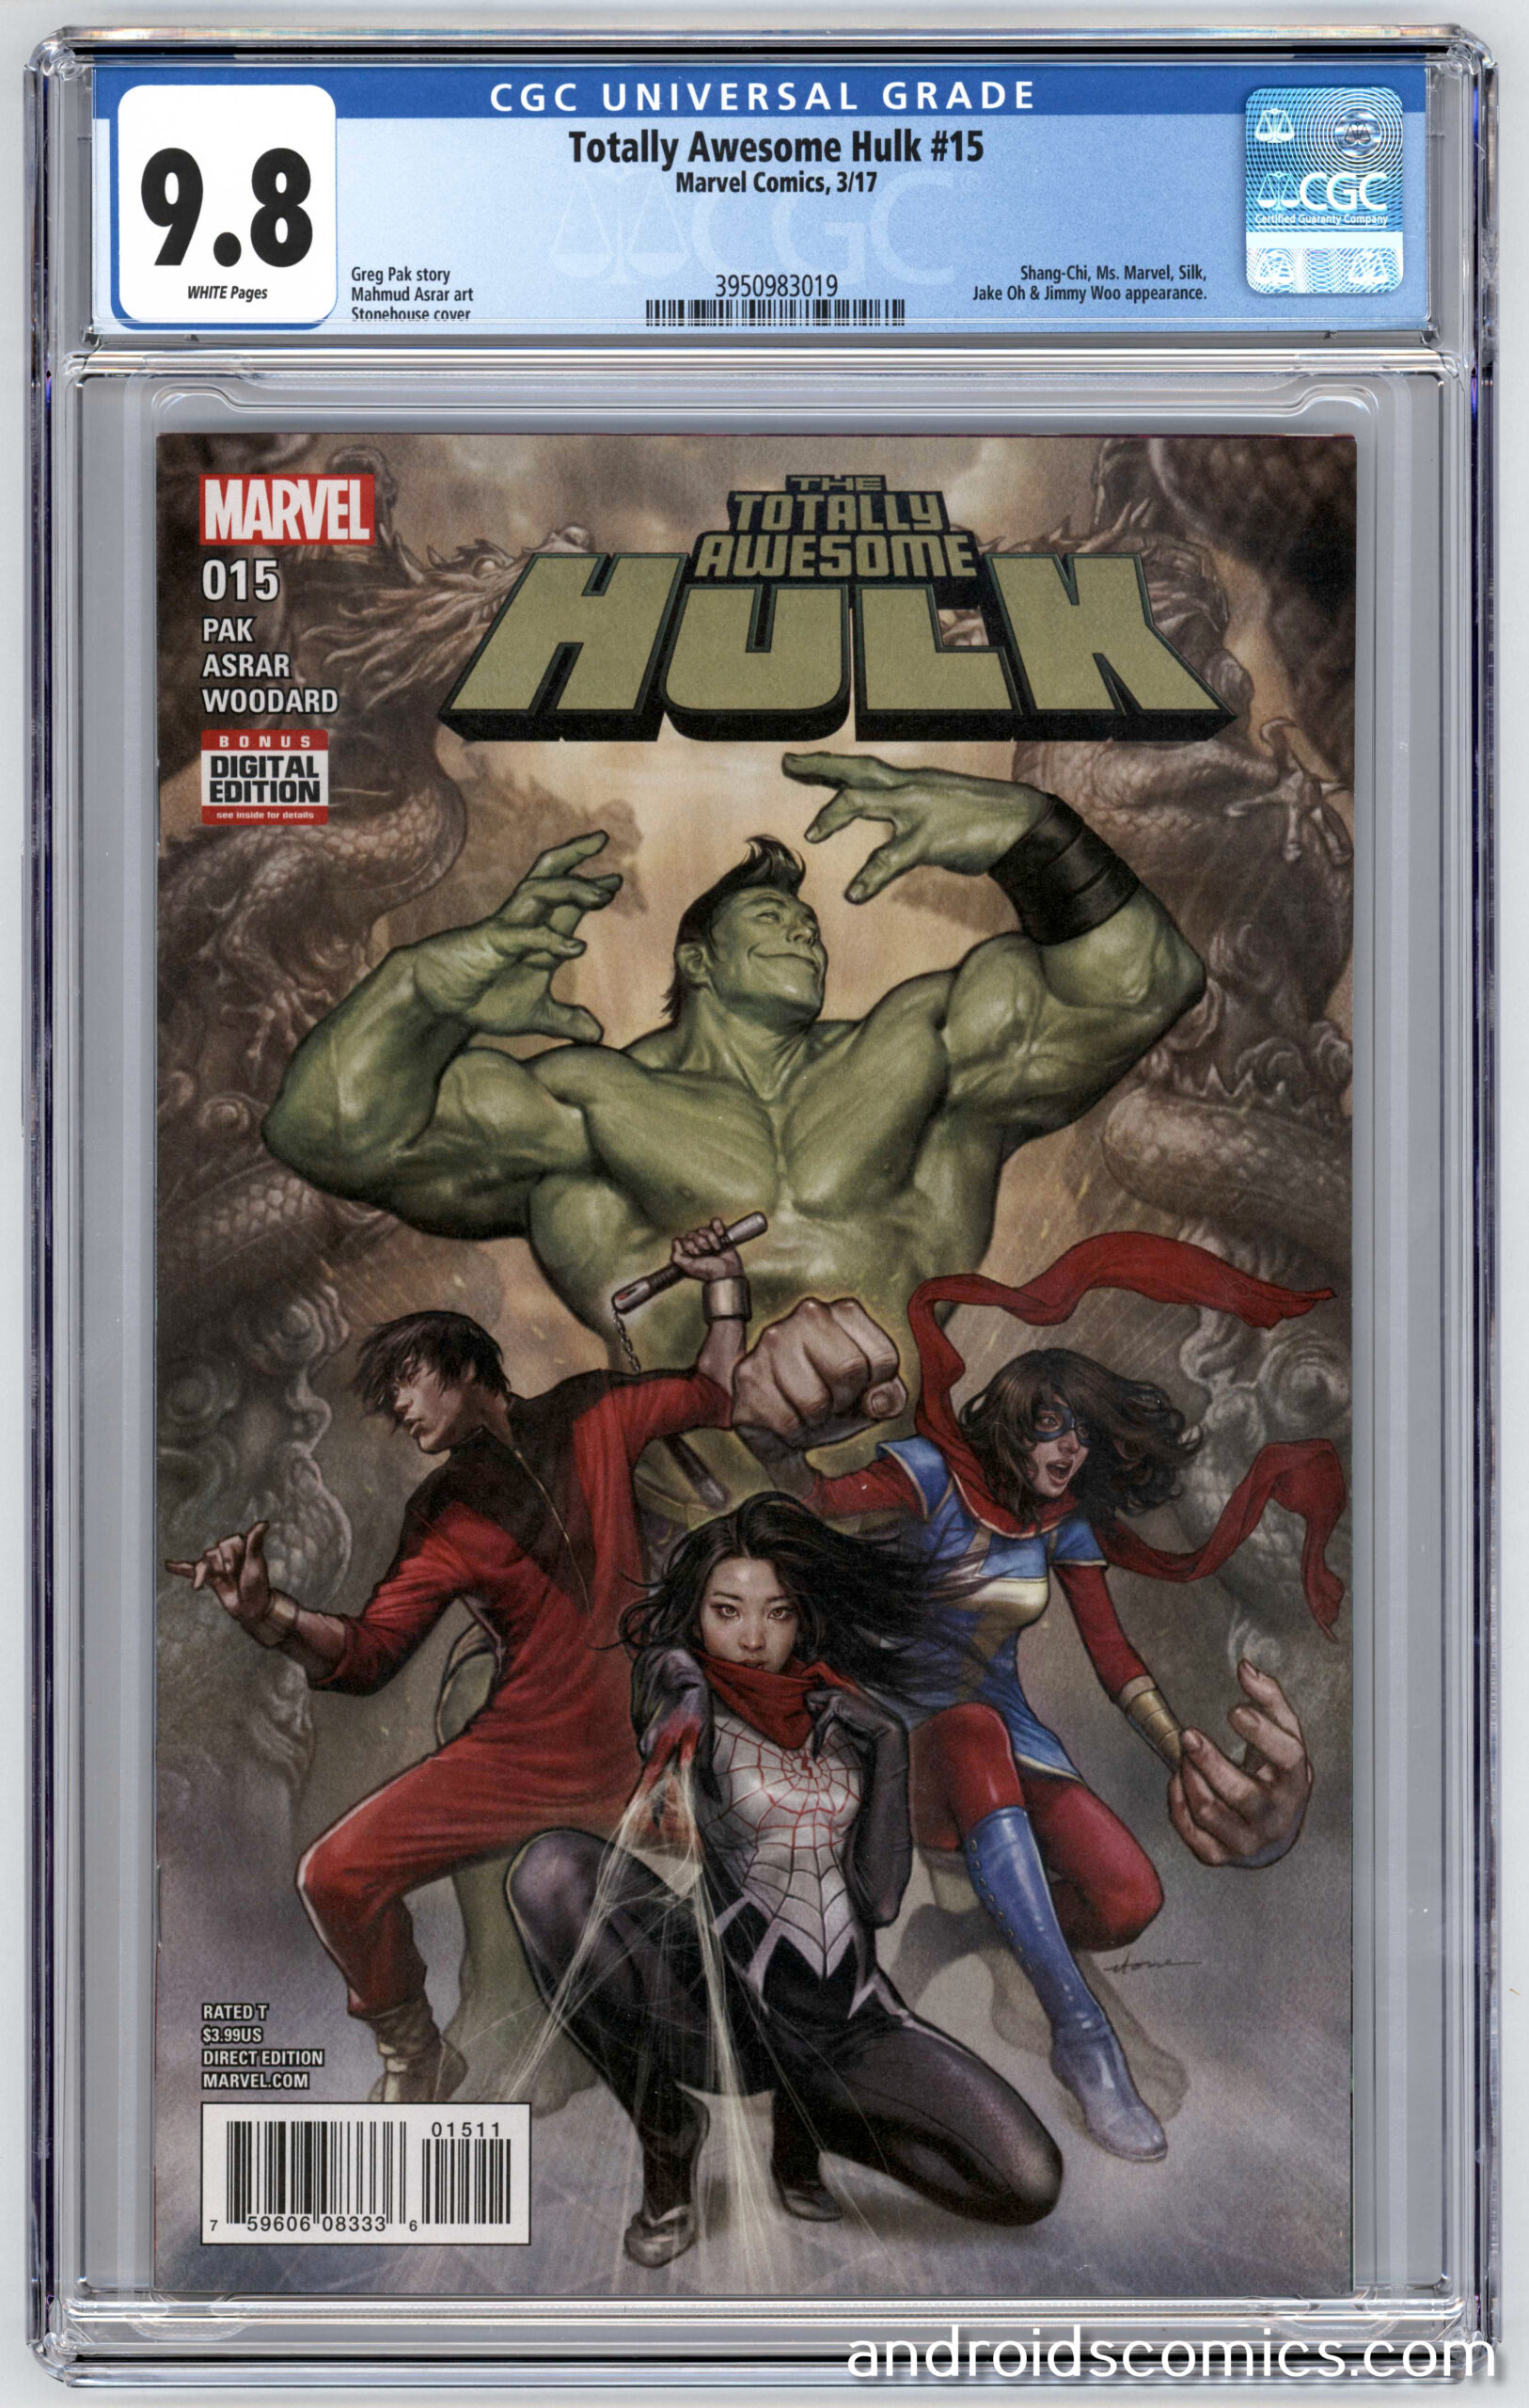 Totally Awesome Hulk #15 CGC 9.8 - Android's Amazing Comics